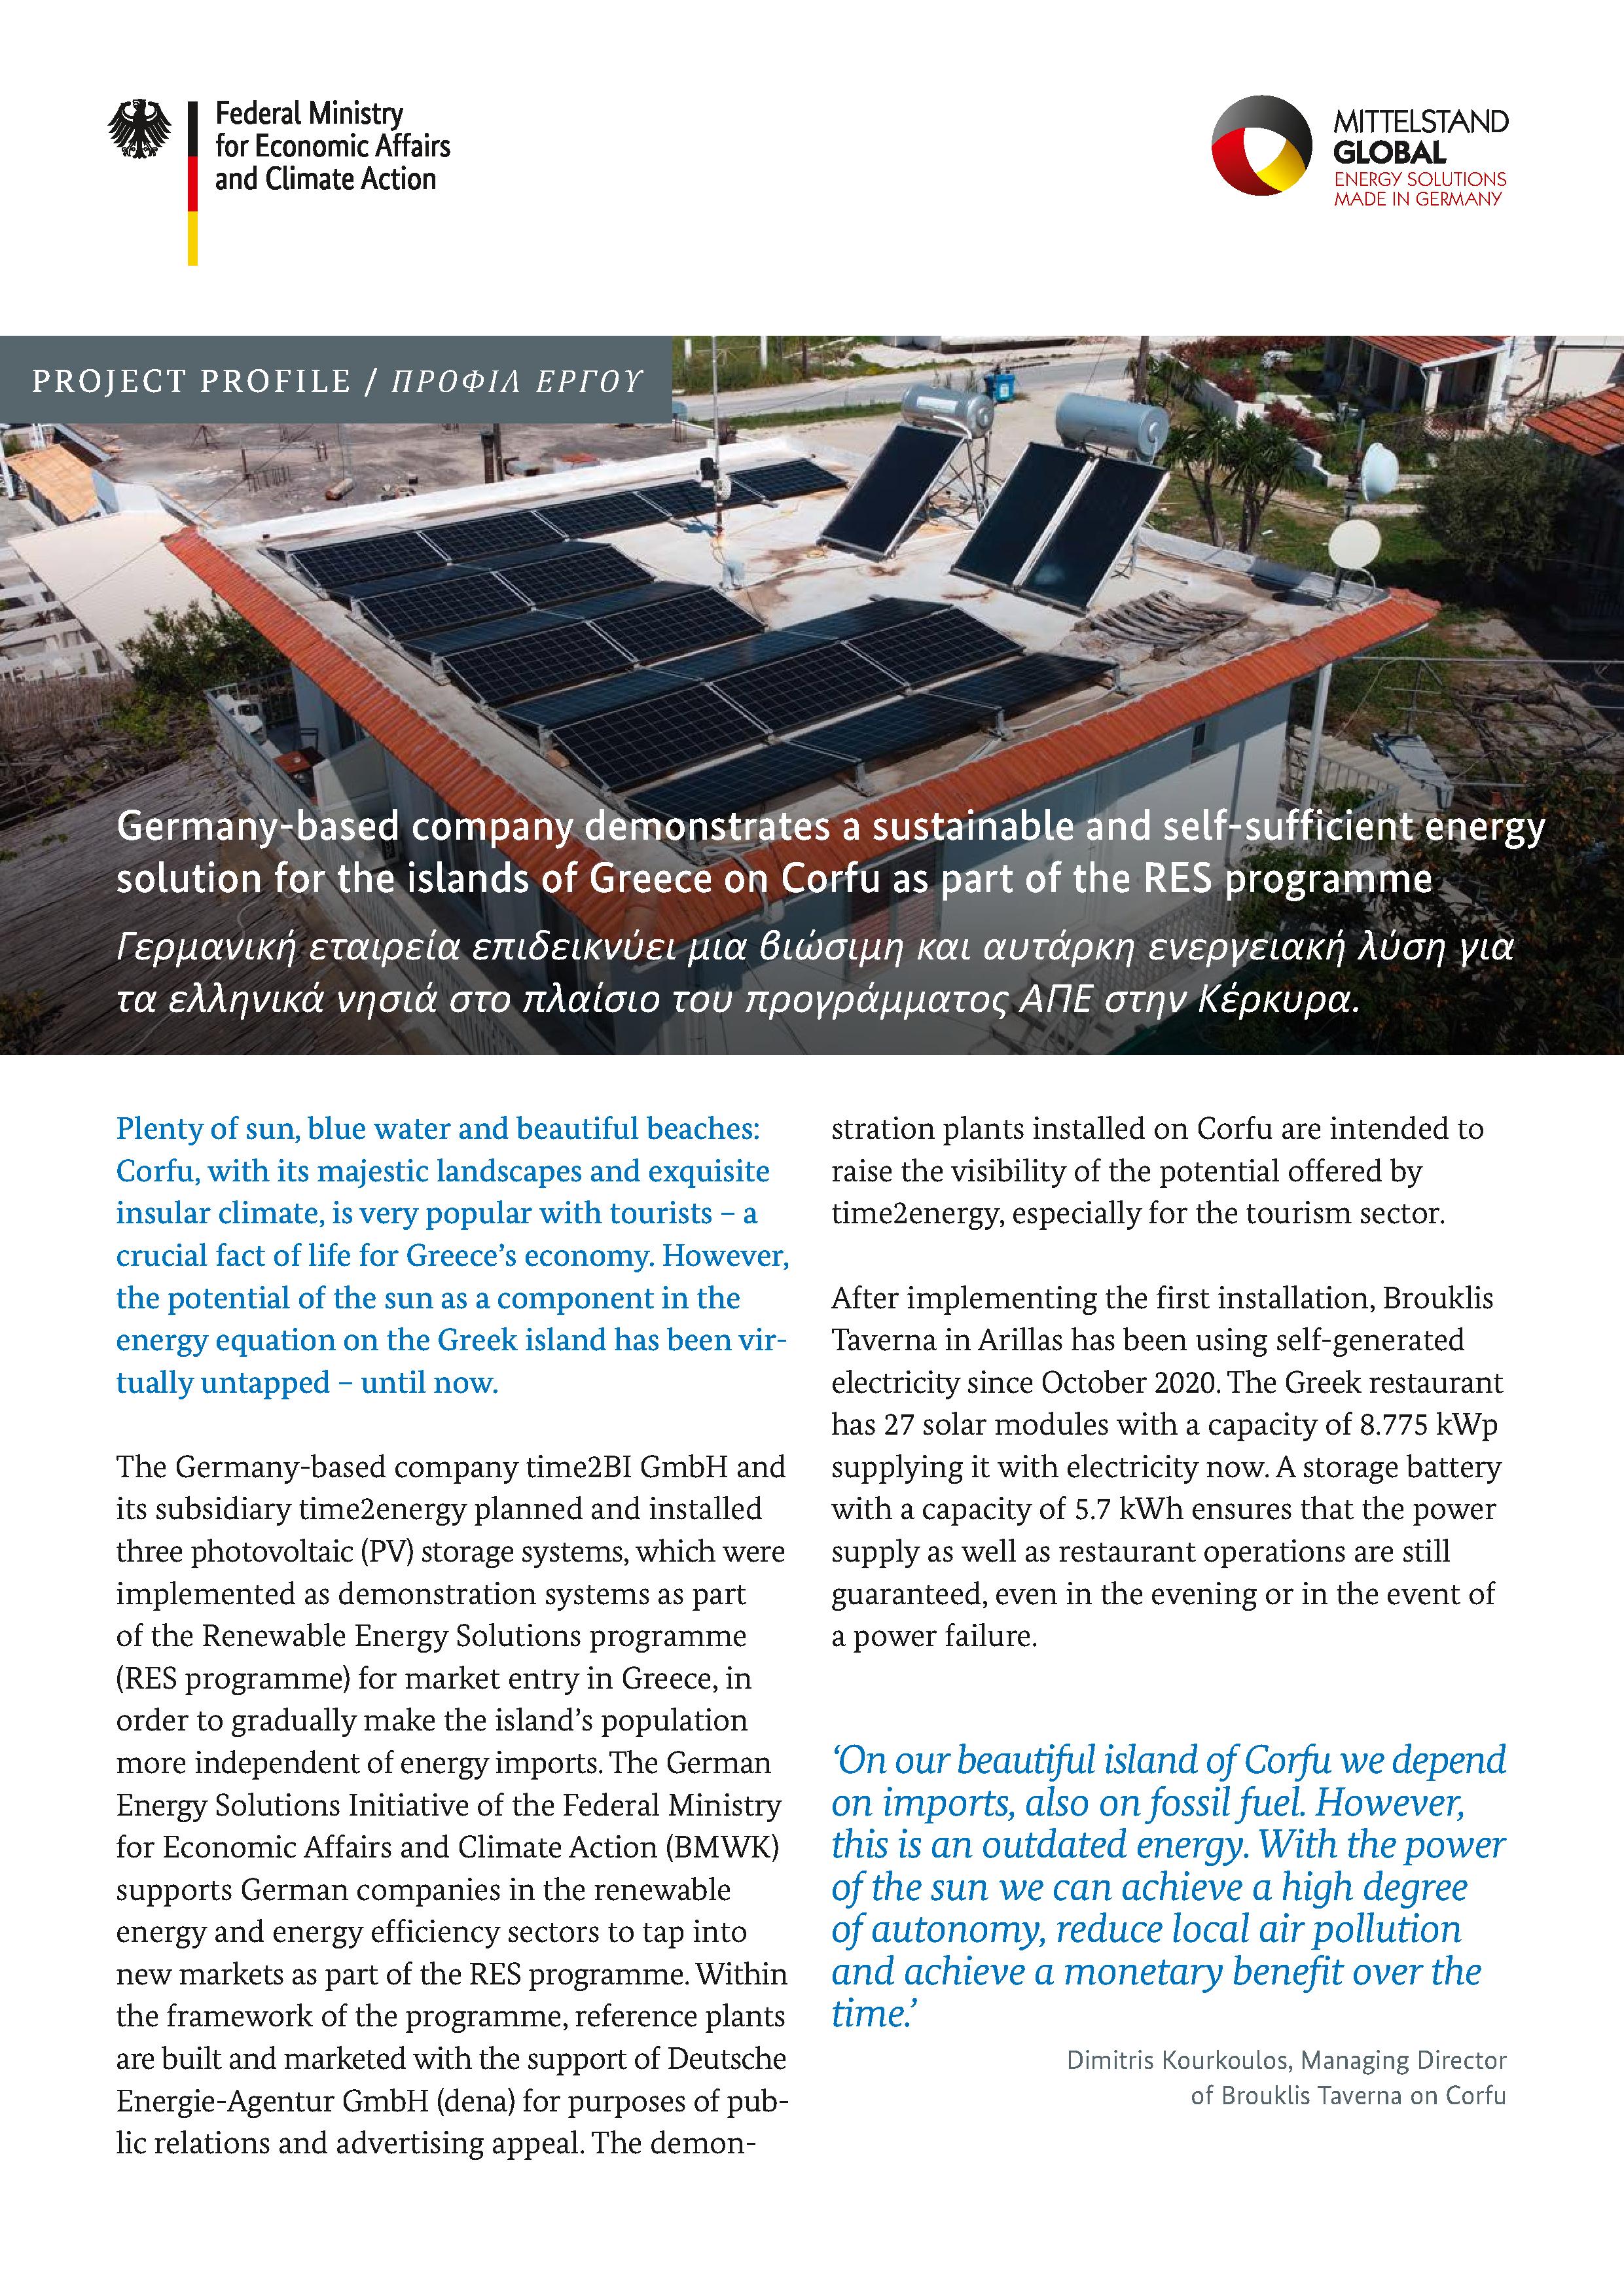 Sustainable and self-sufficient German energy solution for the islands of Greece on Corfu